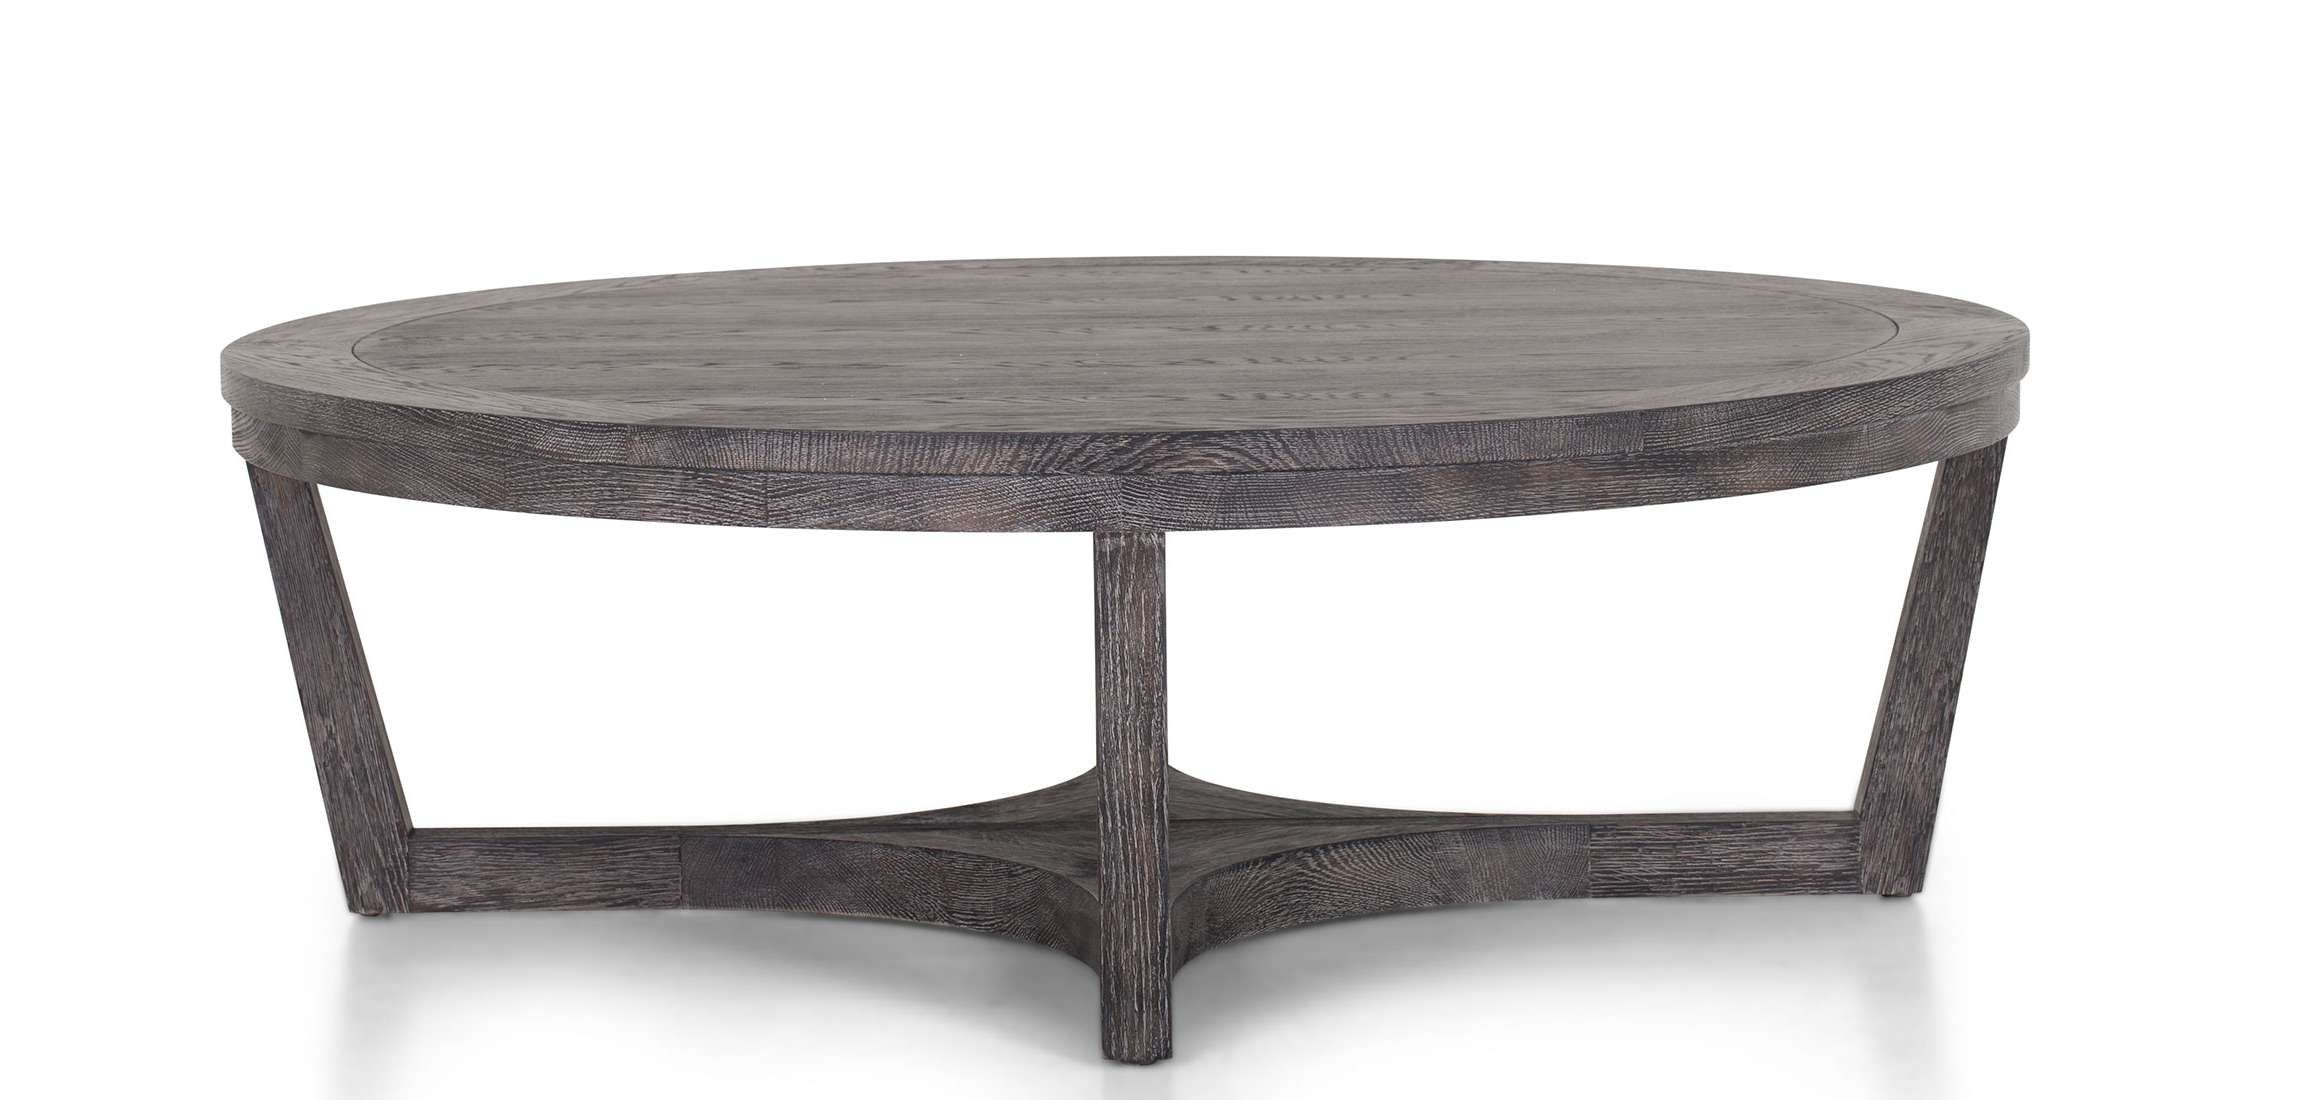 Most Popular Round Oak Coffee Tables Throughout Syrinx – Round Oak Coffee Table In Grey (View 14 of 20)